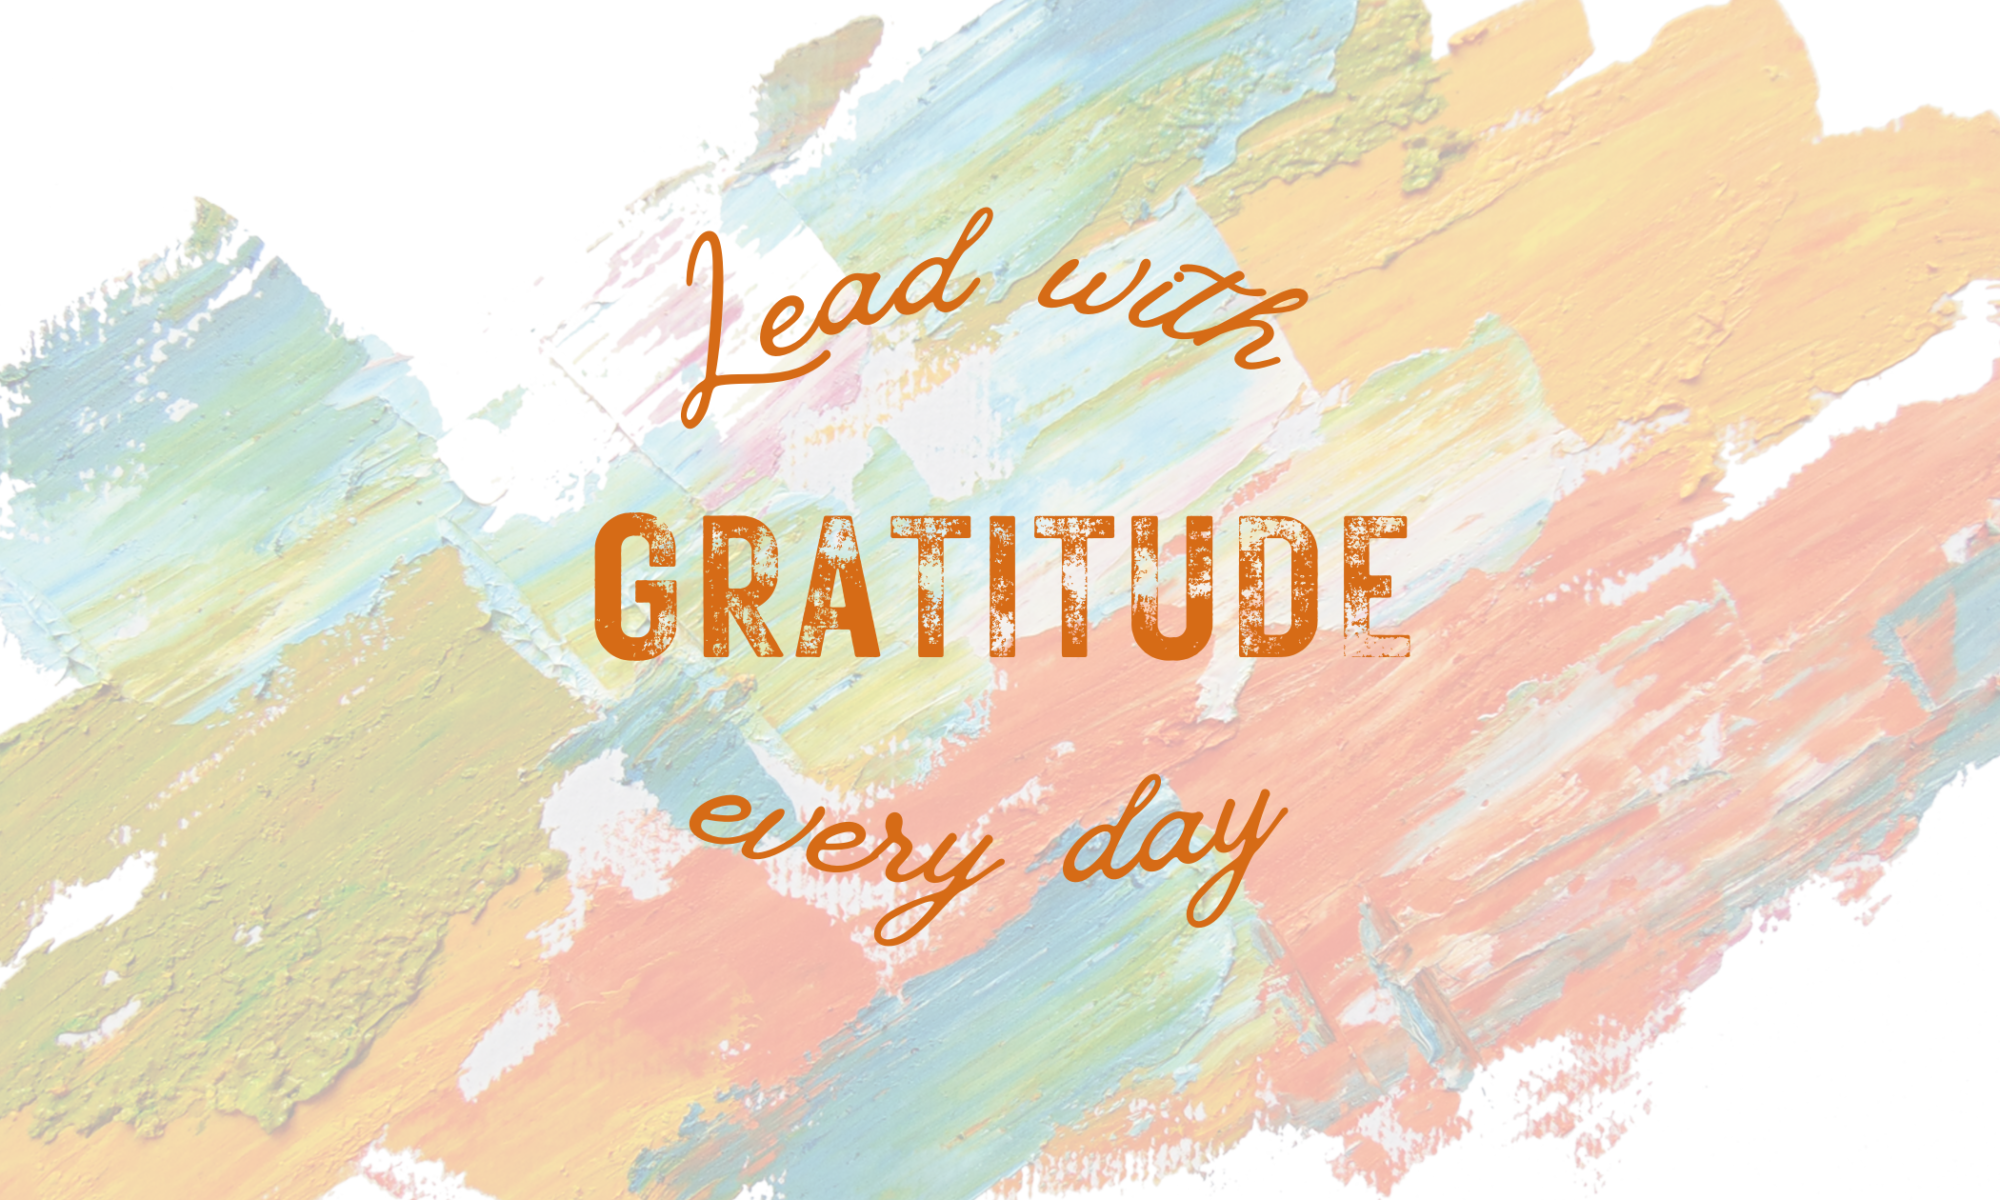 lead with gratitude every day